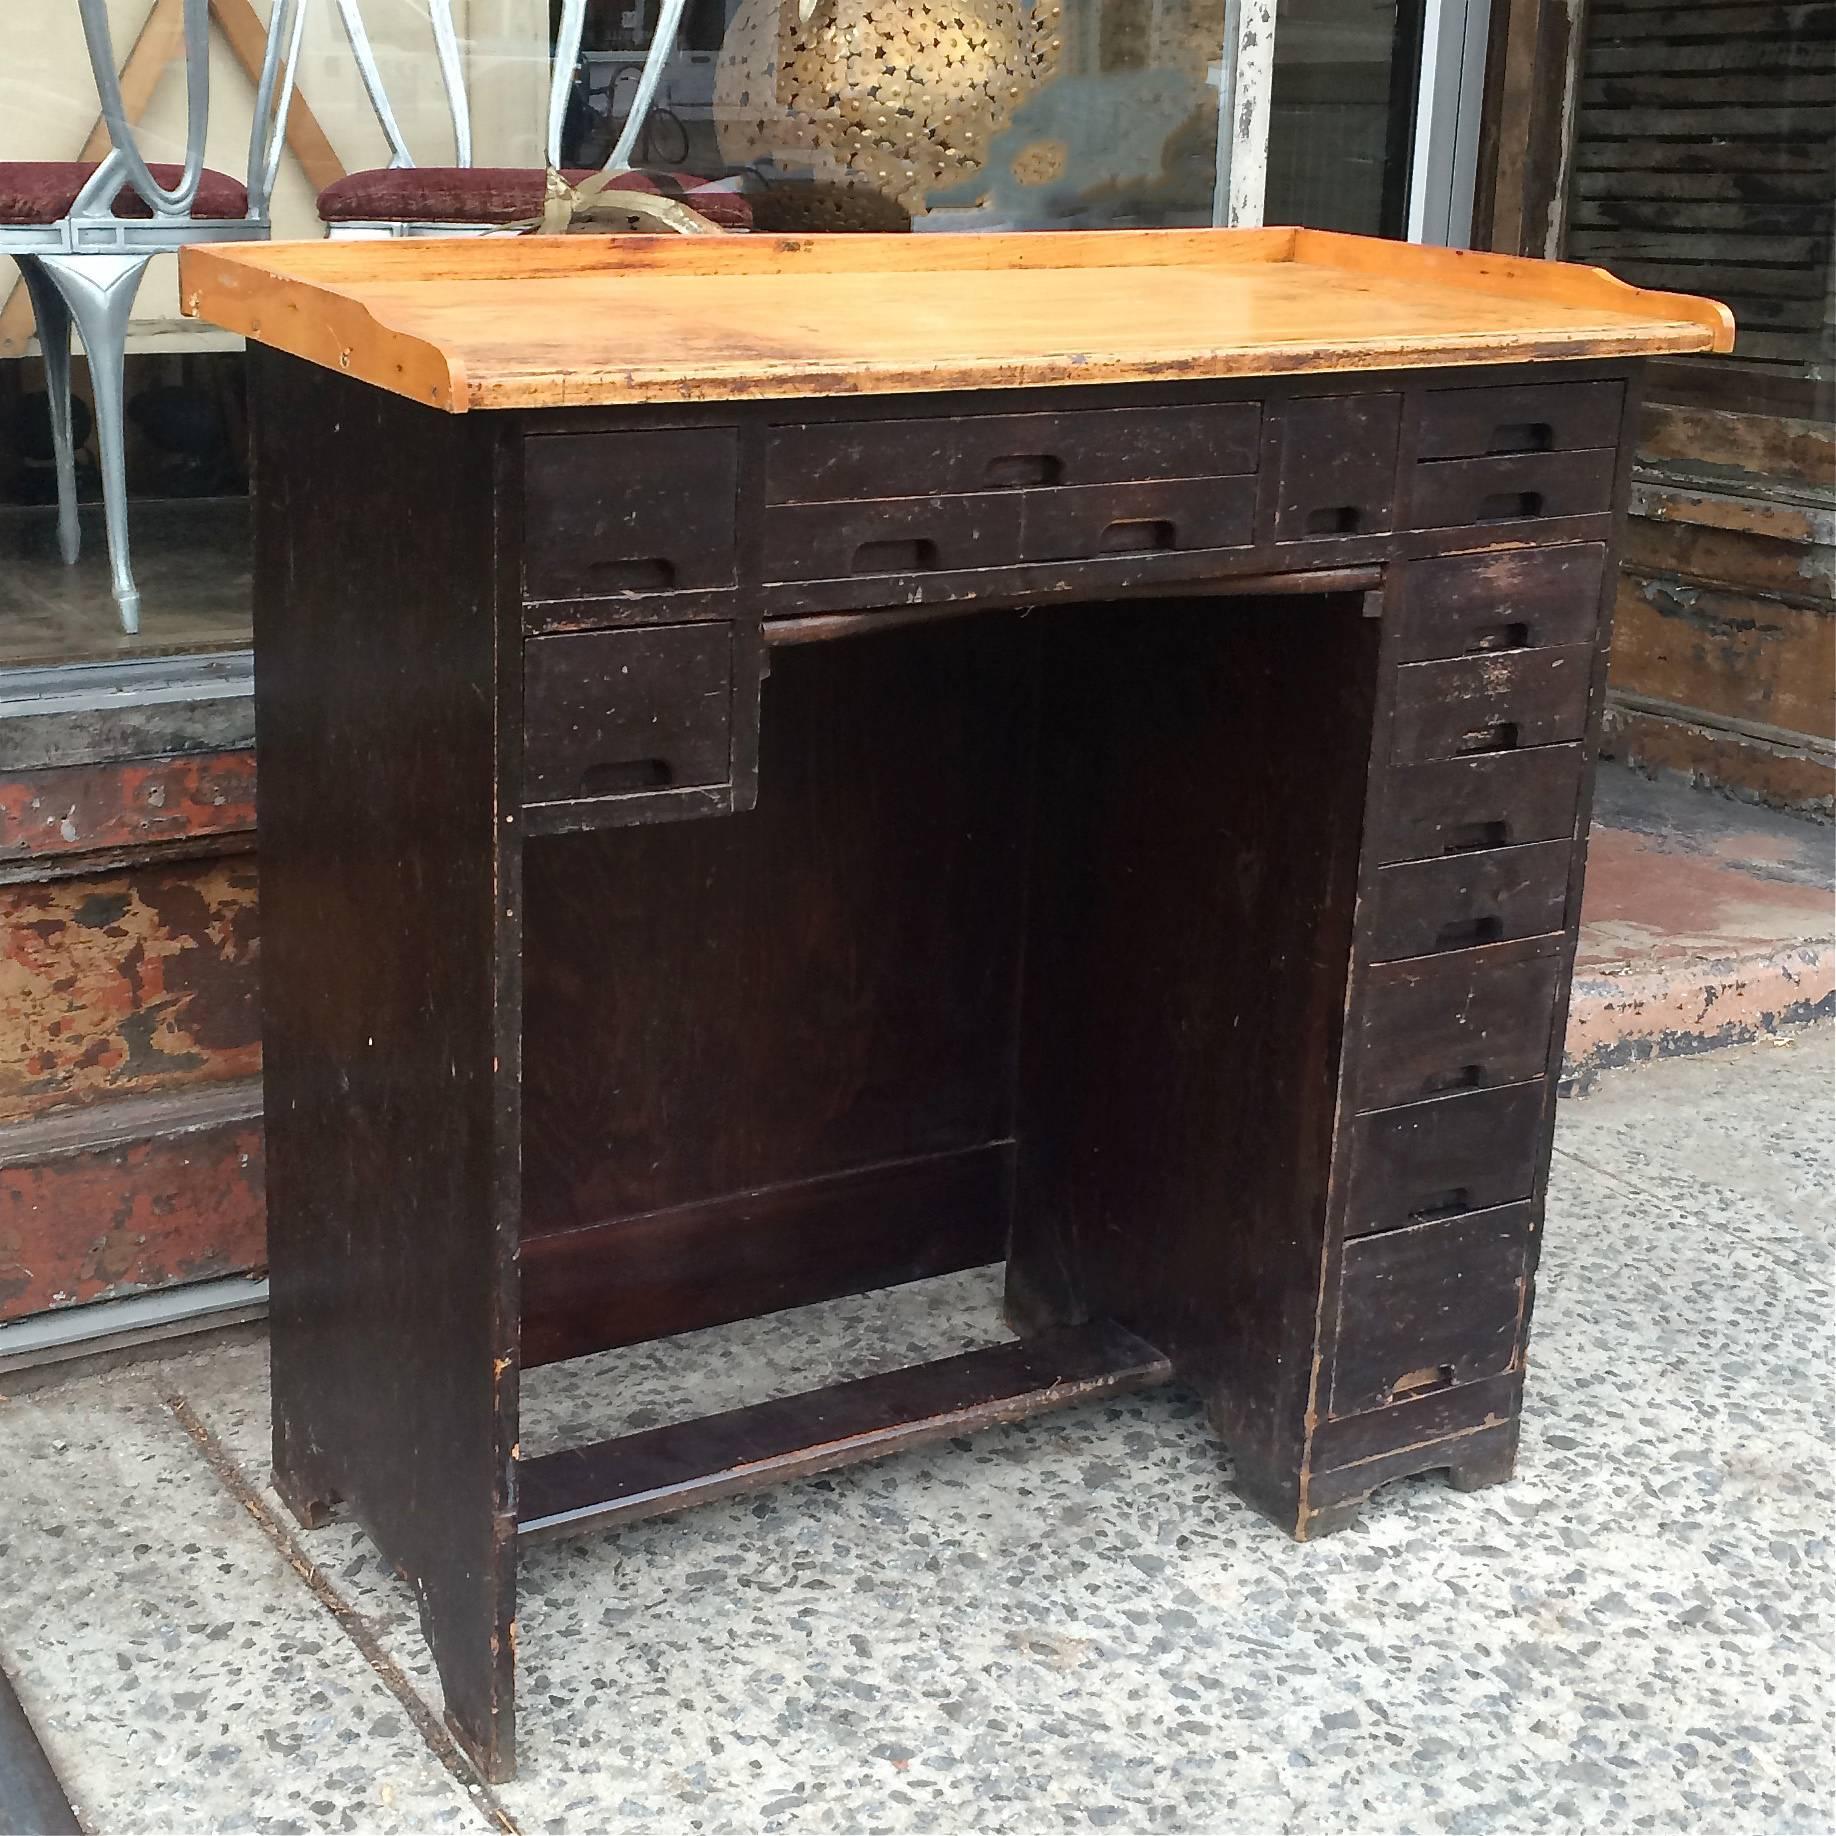 Industrial, maple, watchmaker’s desk with 15 drawers of various size has a wonderful, work-worn patina. There is also a framed canvas ledge that pulls out below the centre drawers to catch small parts. It functions as a tall desk, console or kitchen